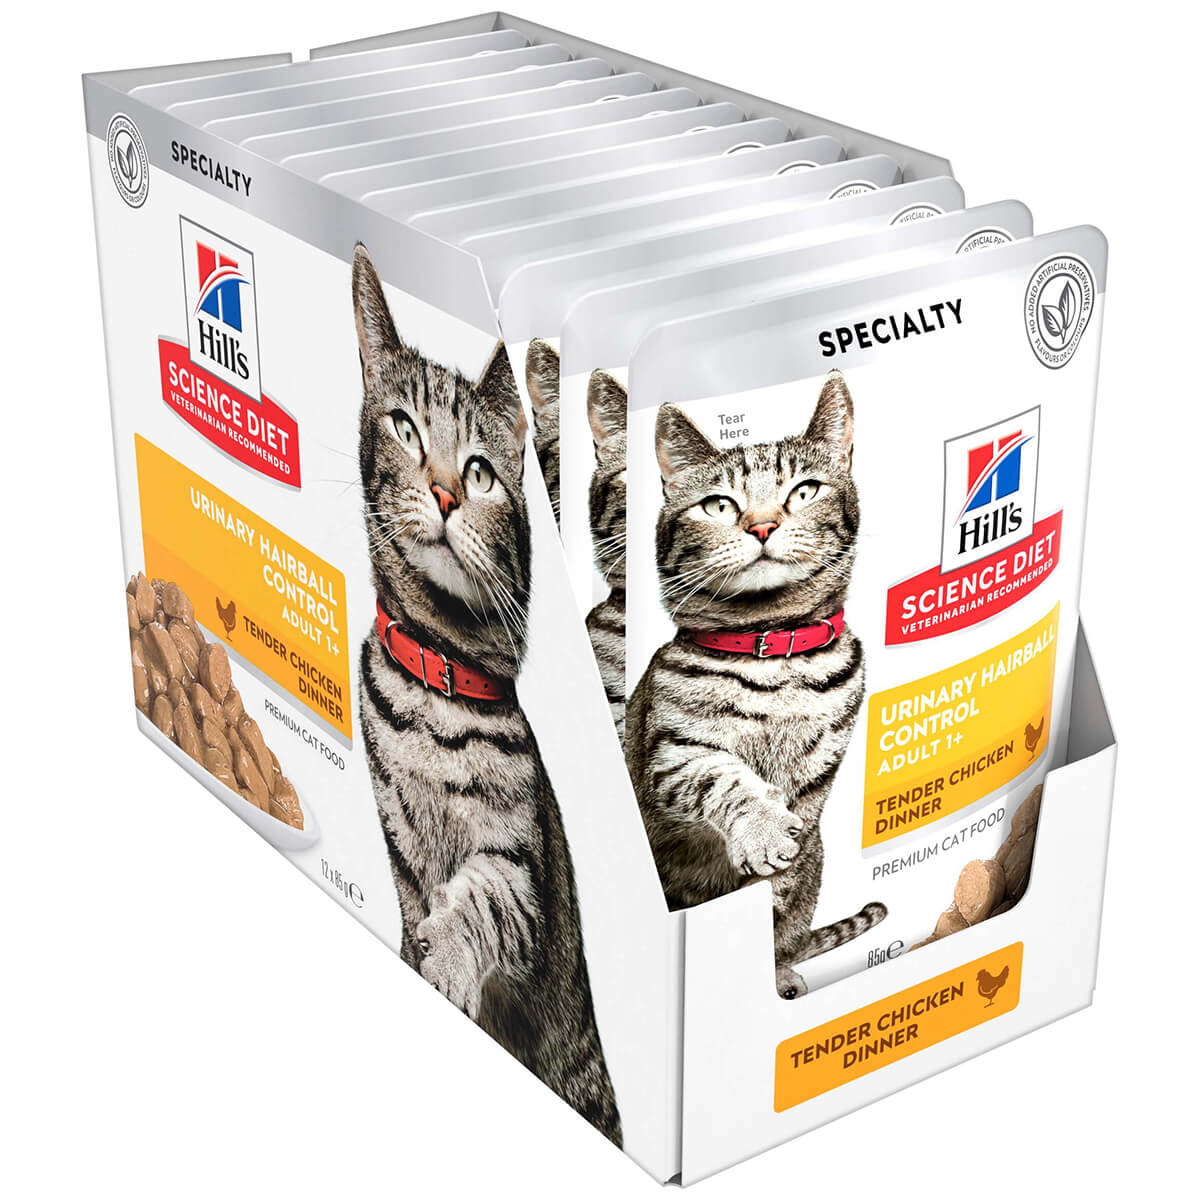 Hill's Science Diet Urinary Hairball Control Adult Chicken Wet Cat Food 85g (132617000146) [default_color]